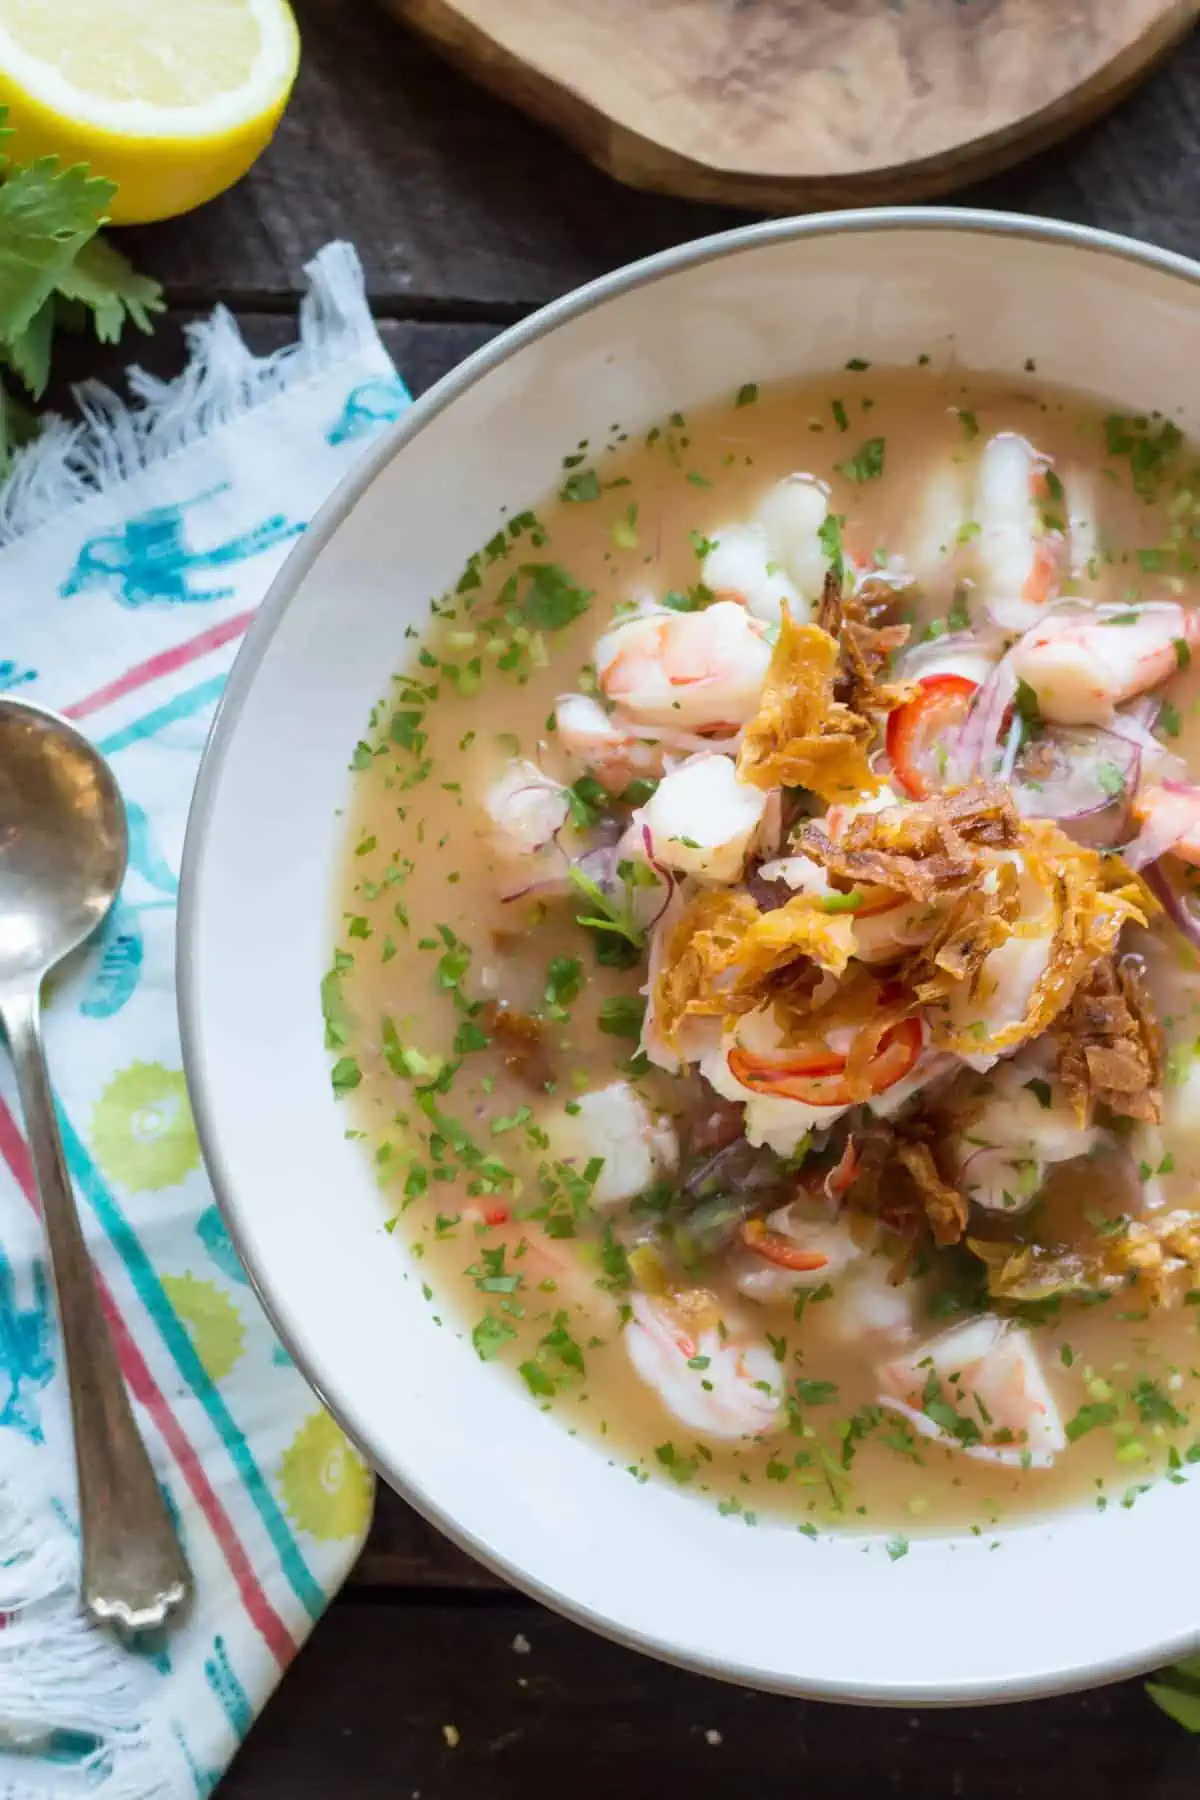 Top view of a white bowl of shrimp ceviche garnished with fried shallots.